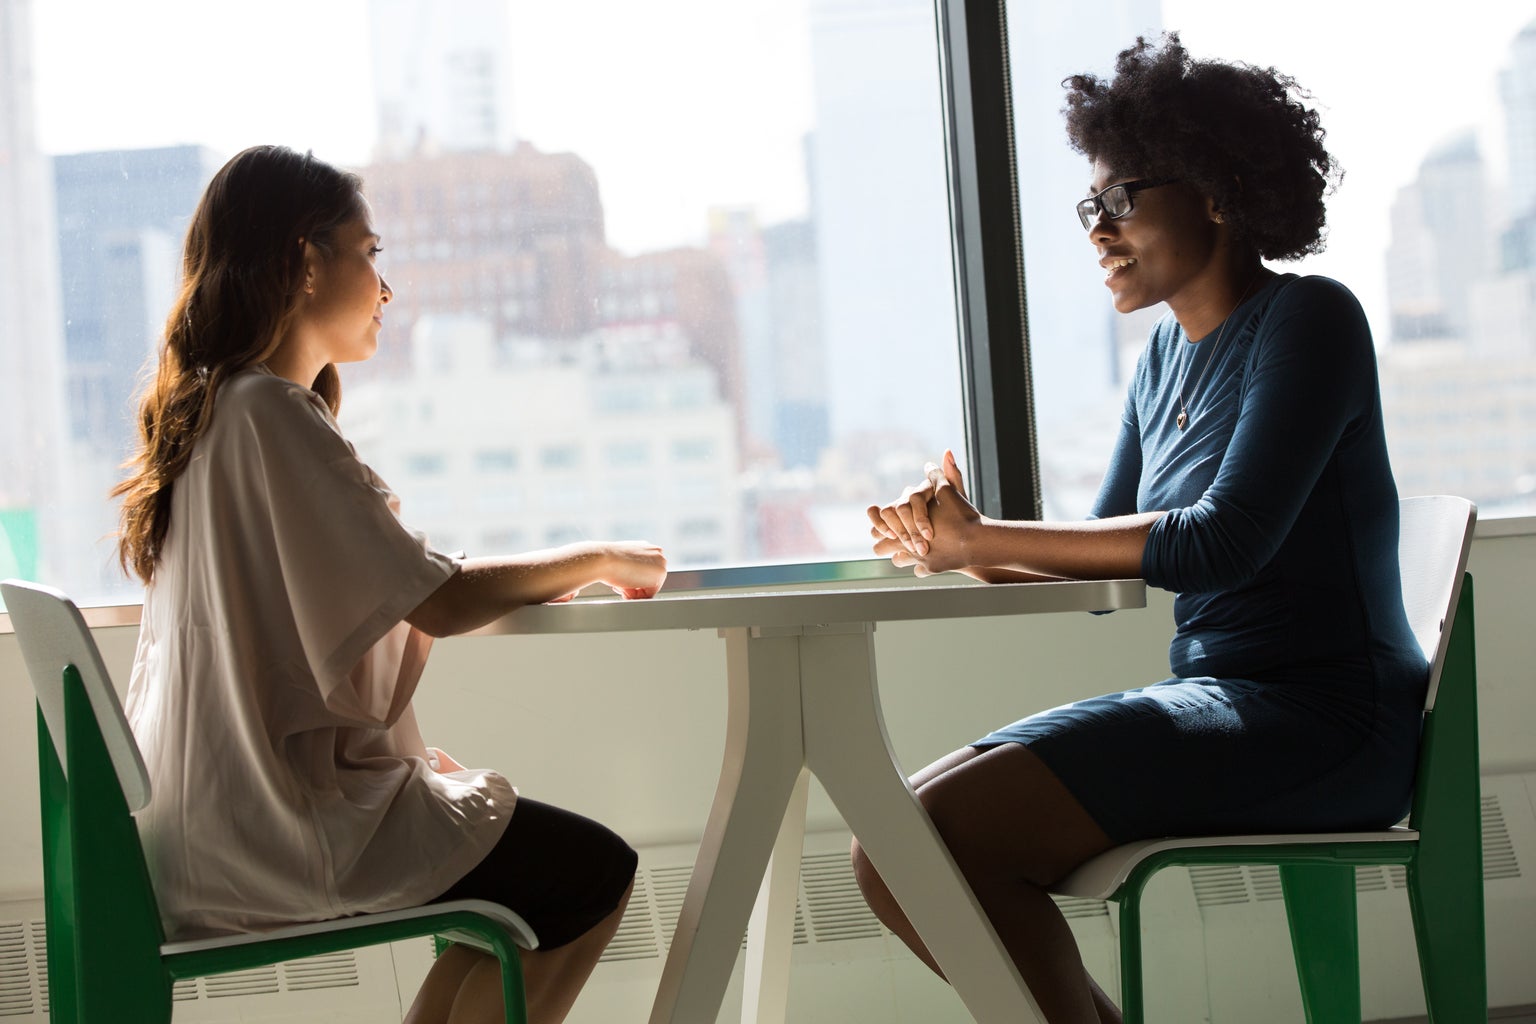 Two women sit at a table and talk